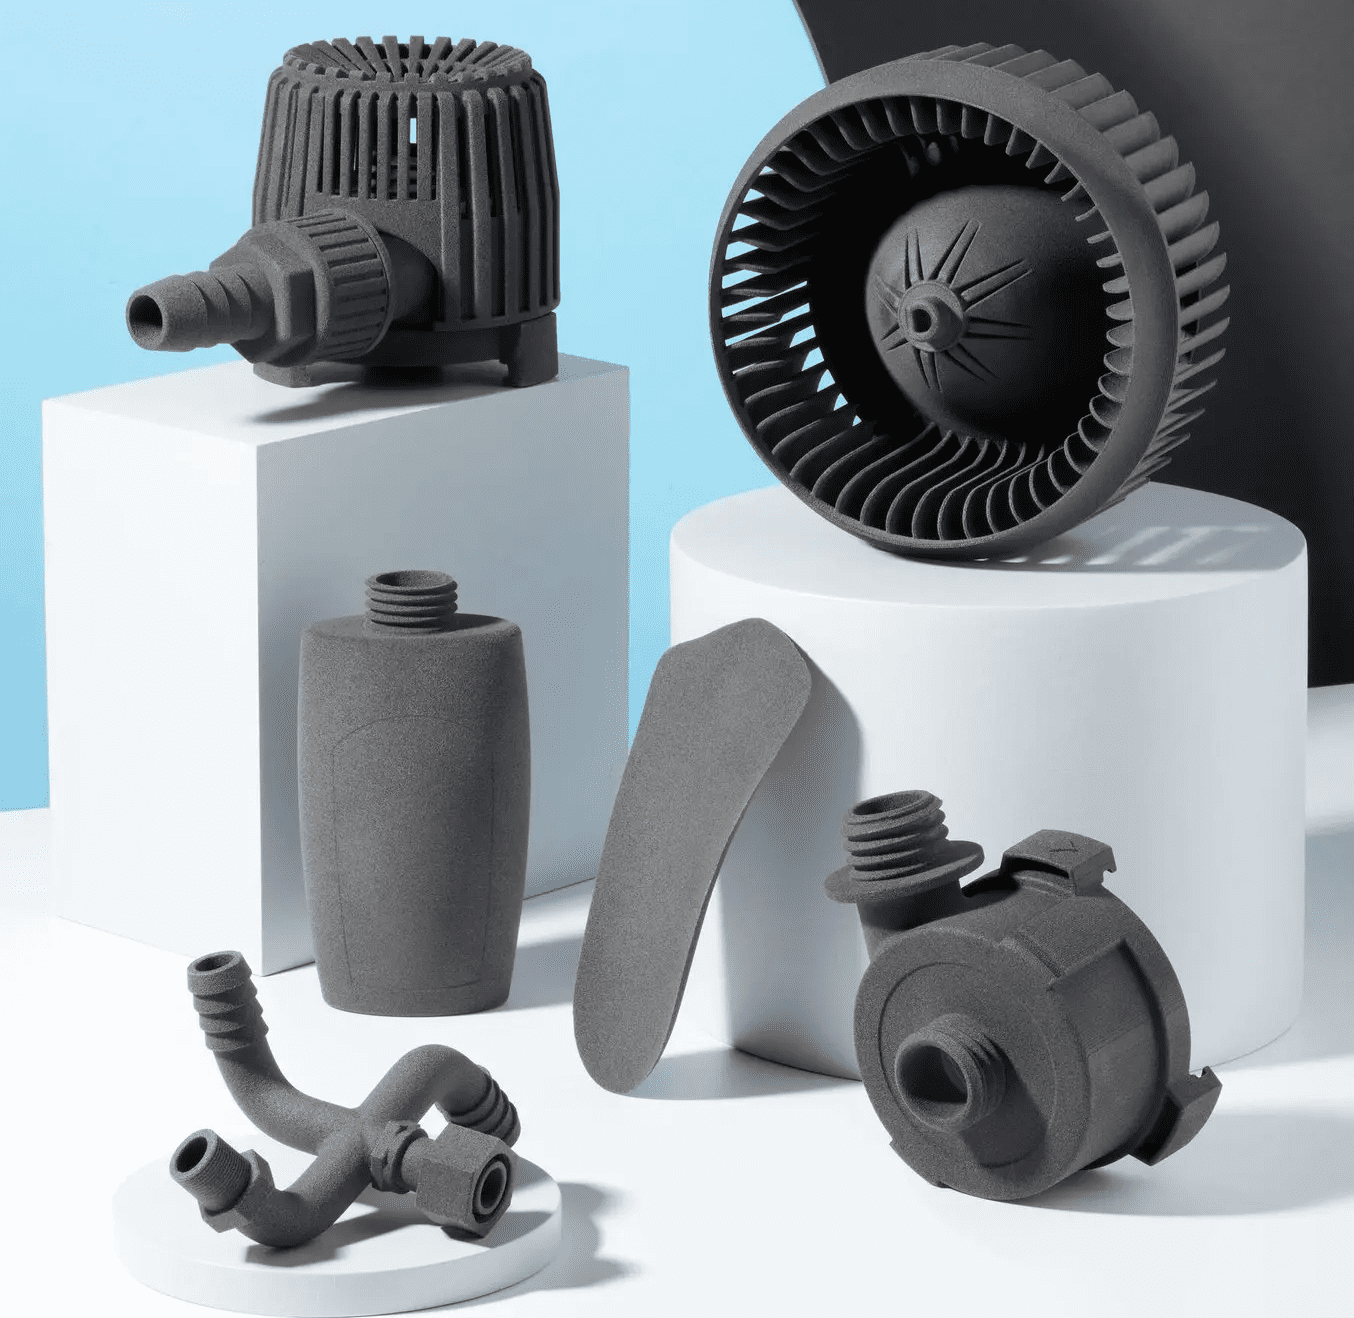 Image shows 3D-printed parts from many industries with Polypropylene powder from formlabs